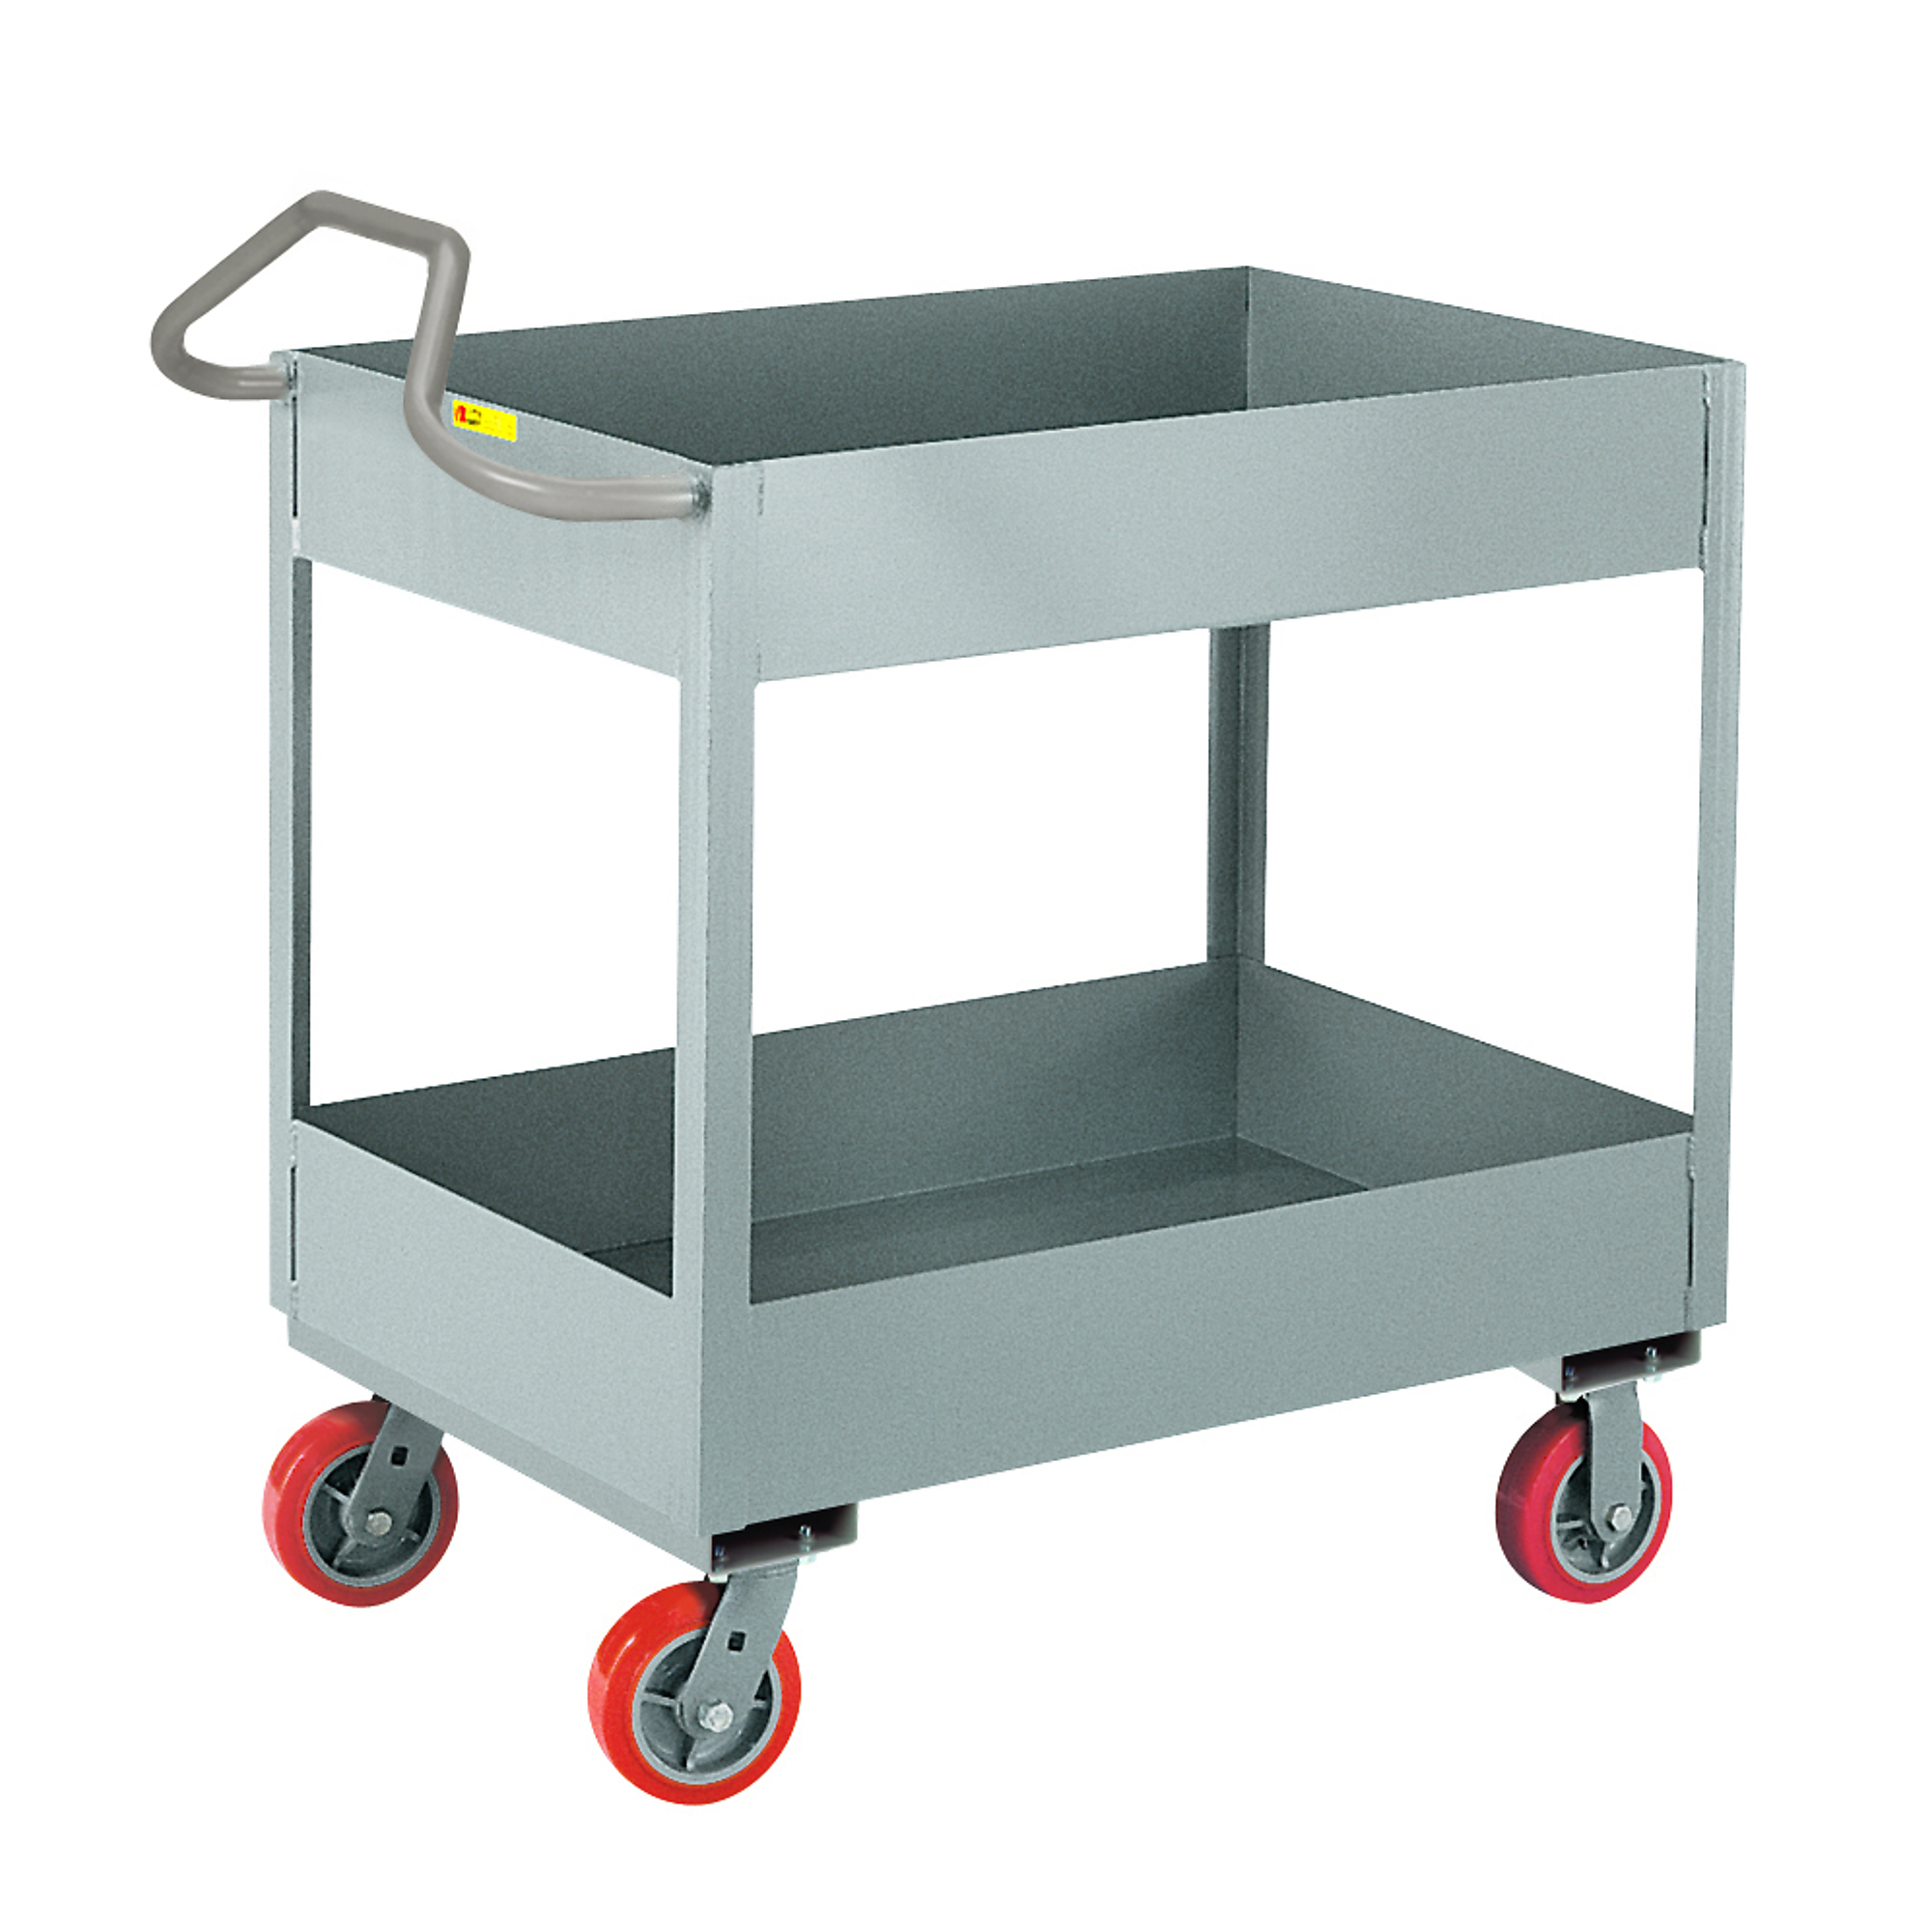 Little Giant, 6Inch Deep Shelf Truck, Ergo Handle, 24x48, 3600 lbs, Total Capacity 3600 lb, Shelves (qty.) 2, Material Carbon Steel, Model ENDS-2448X6